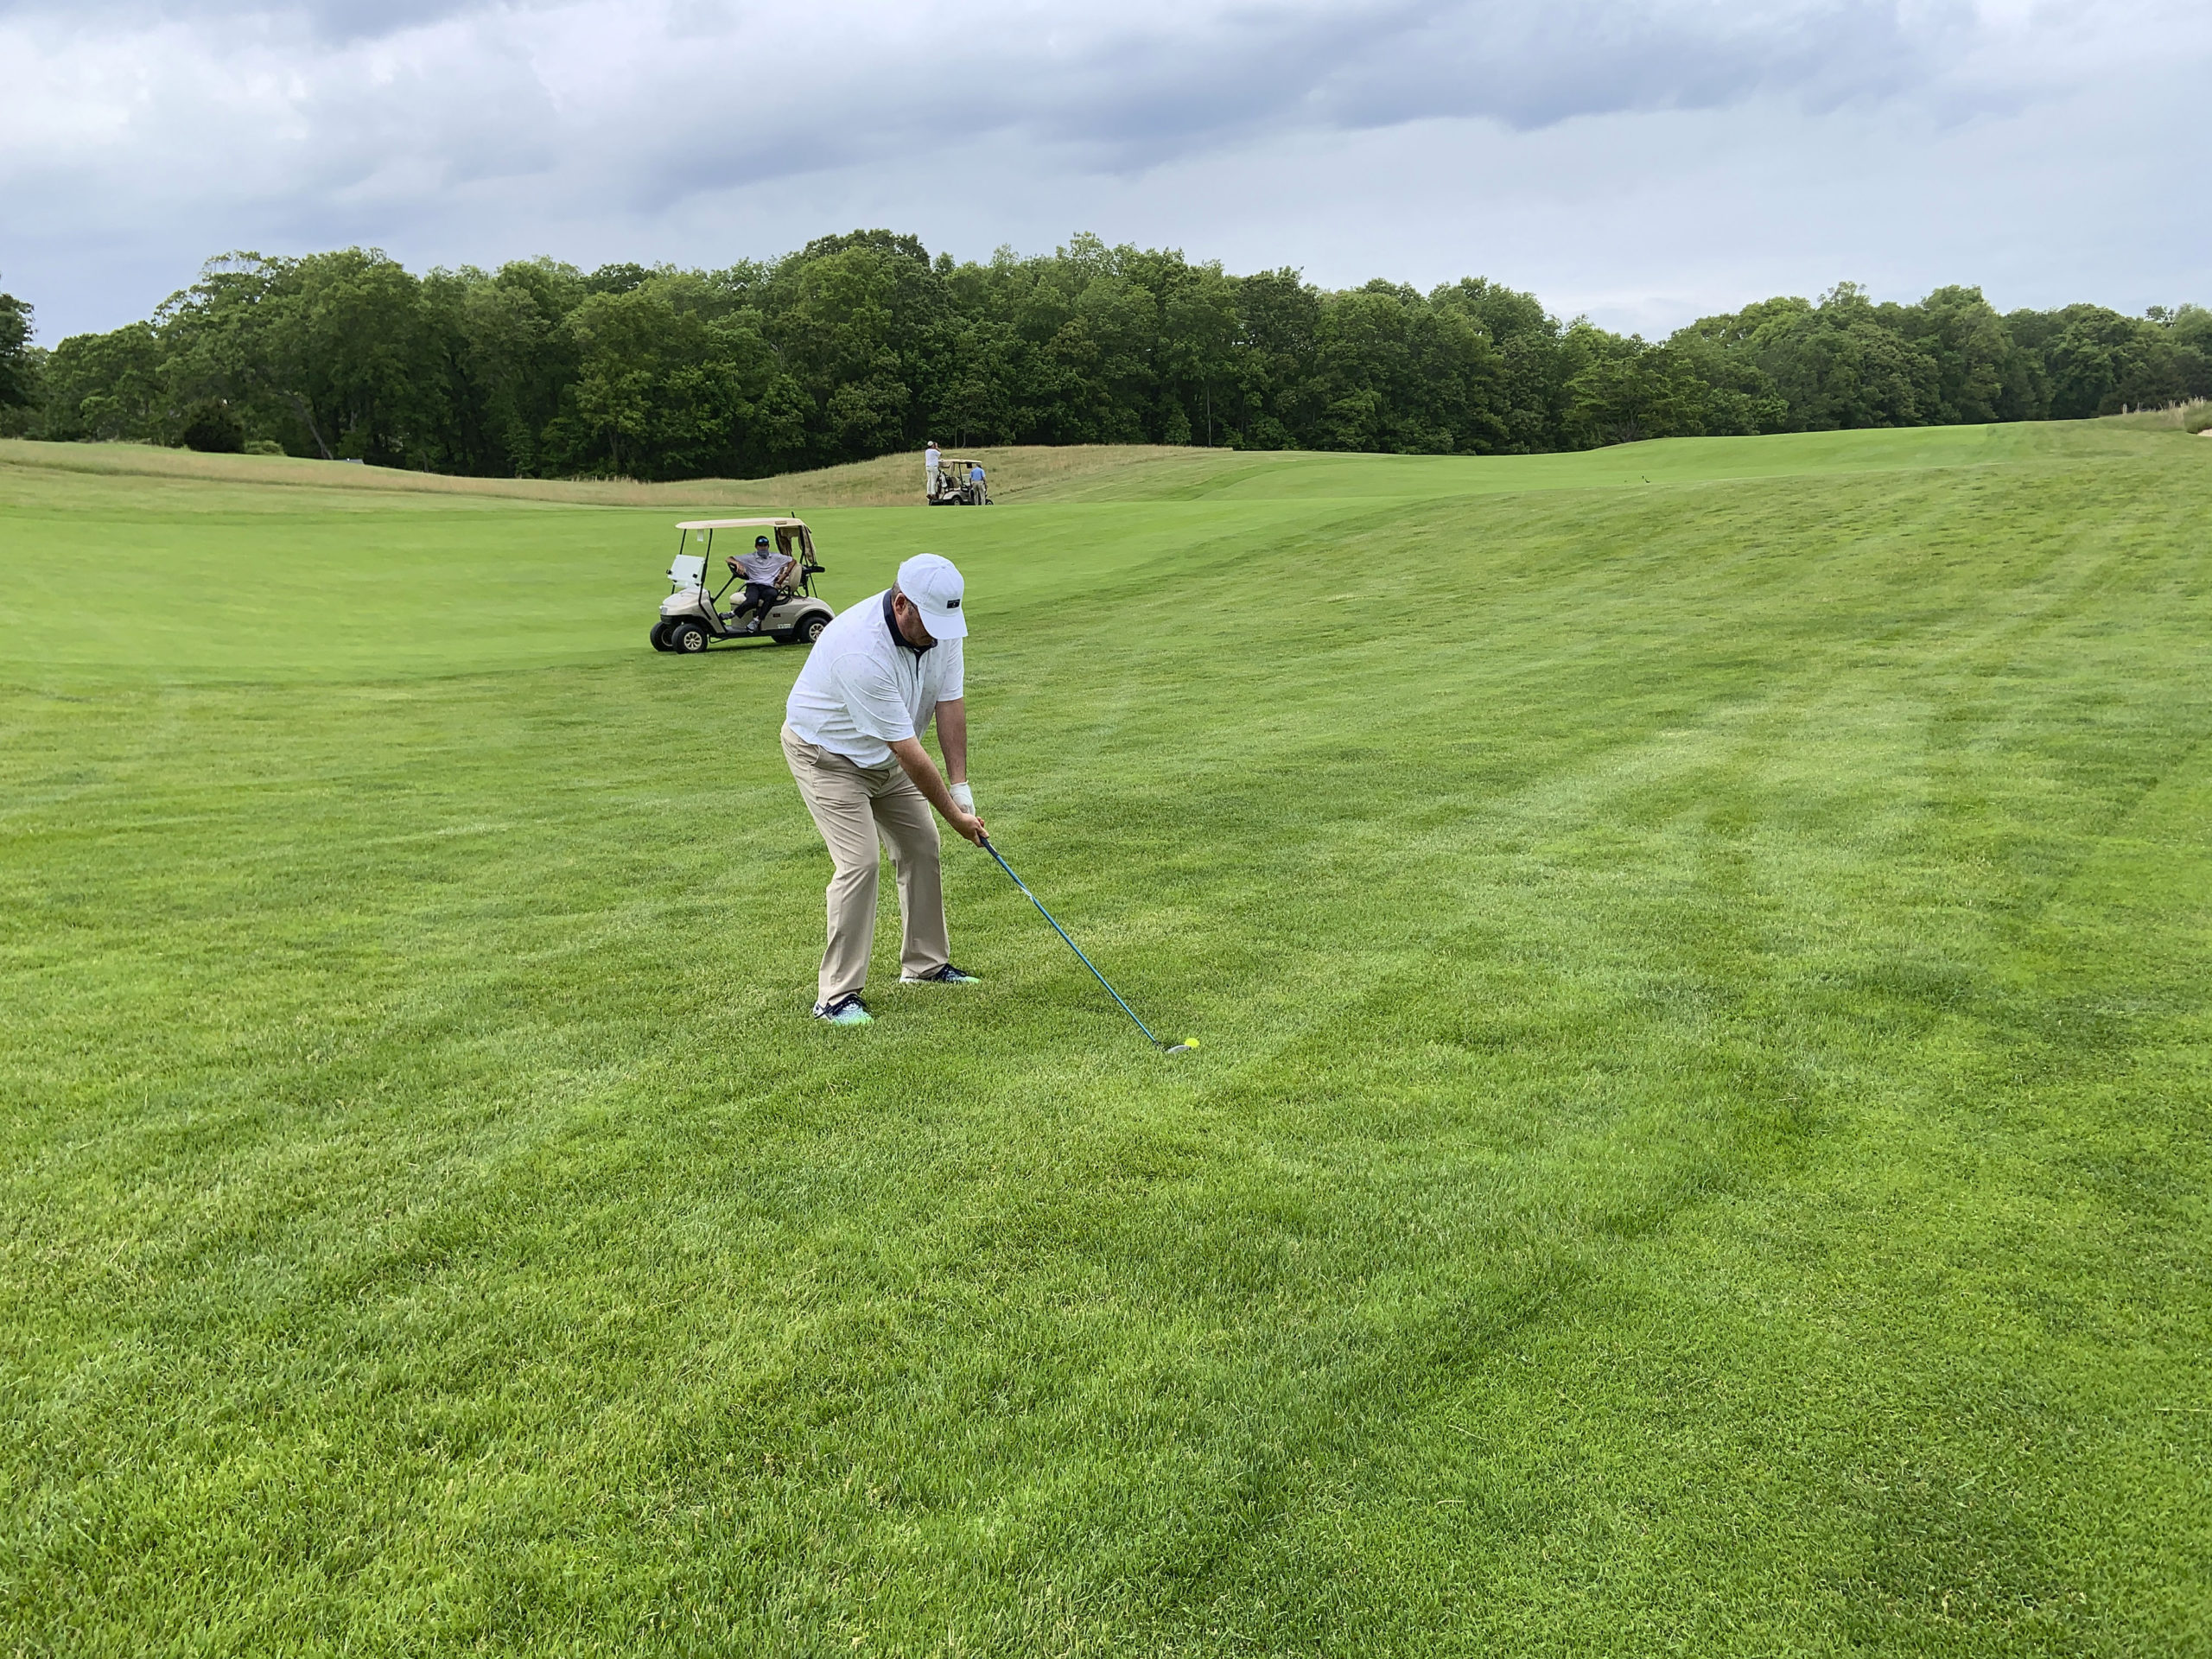 The South Fork Country Club in Amagansett raised over $115,000 for the East Hampton/Amagansett and Springs food pantries in a charity golf match on Friday. GABRIELA CARROLL